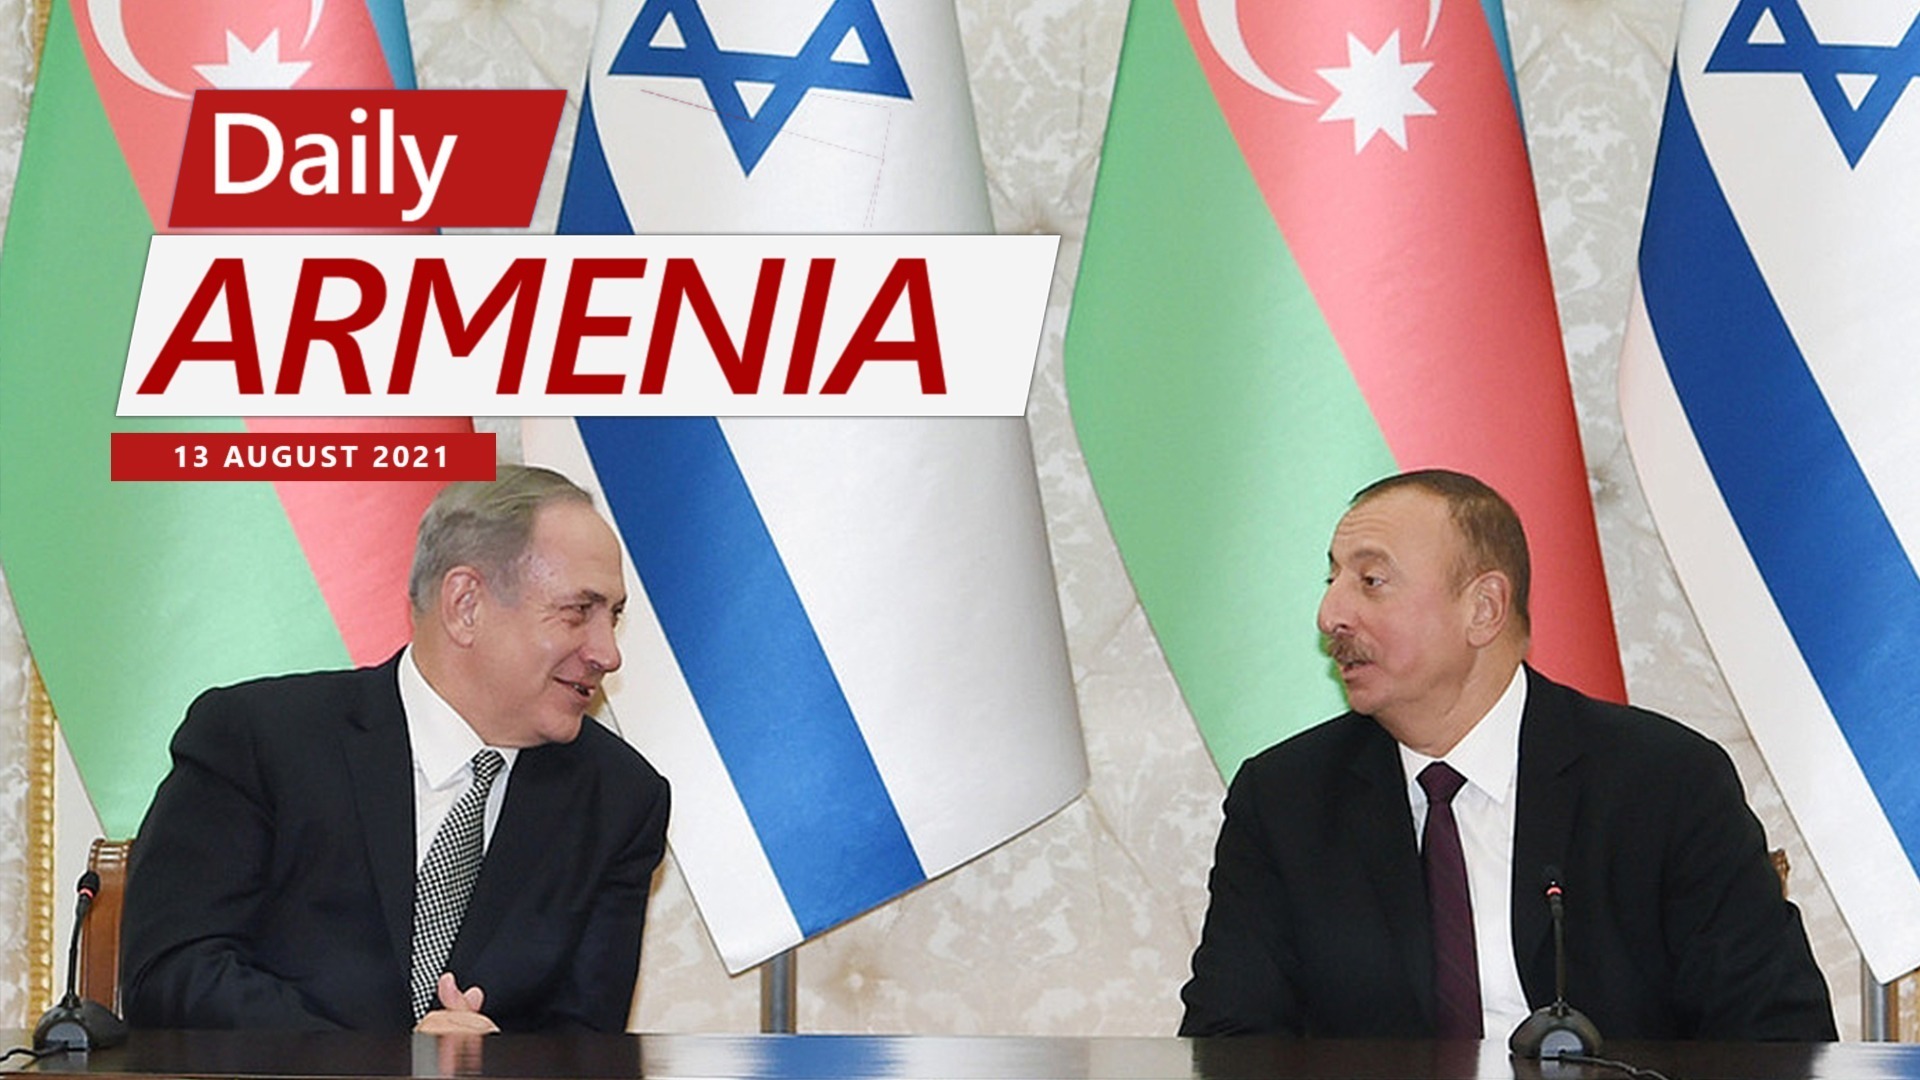 Azerbaijan in talks with Israel to buy $2 billion worth of weapons